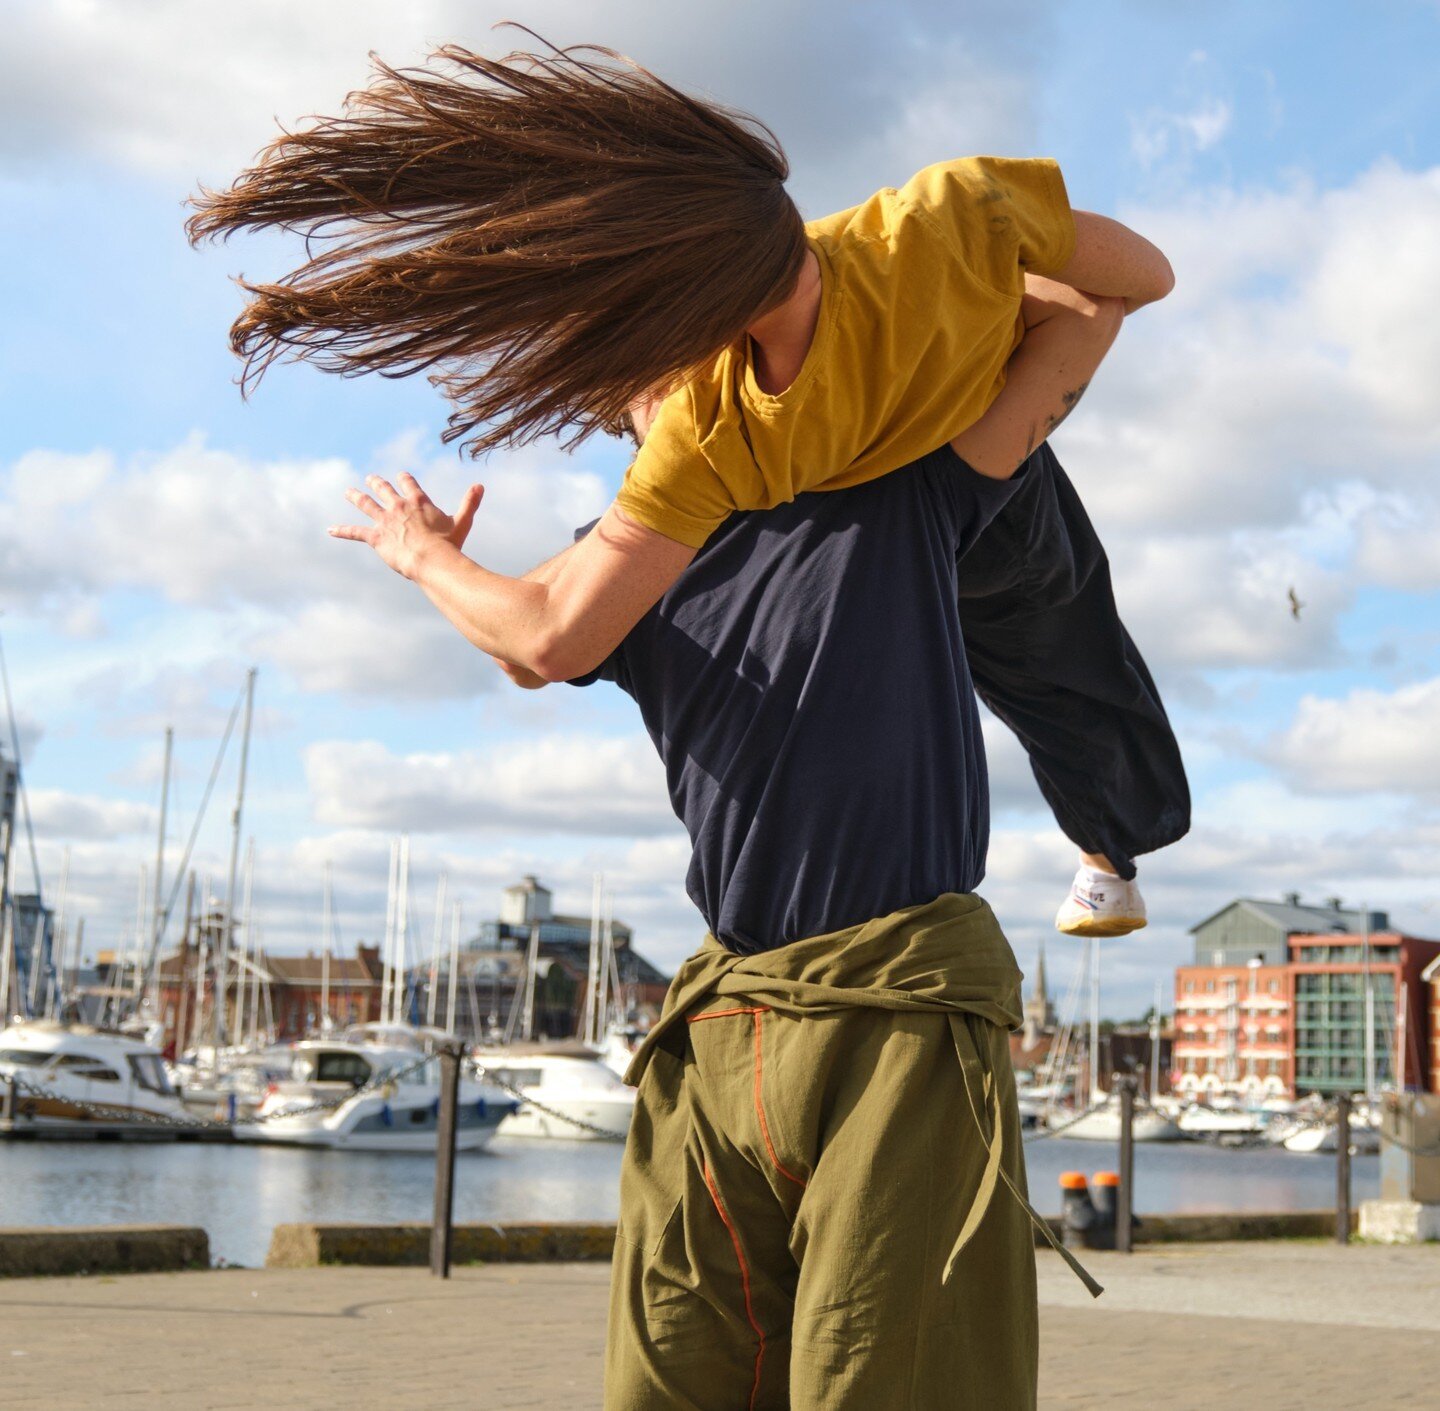 📣 DON'T MISS THIS!! 📣 

Head to #BellSquareLDN tomorrow to catch @vanhulledt's DOVETAIL show!

This spectacular show fuses elements of &lsquo;breakin&rsquo; &amp; martial arts to create a fantastic contemporary dance performance!

🗓️ Sat 20 May, 1